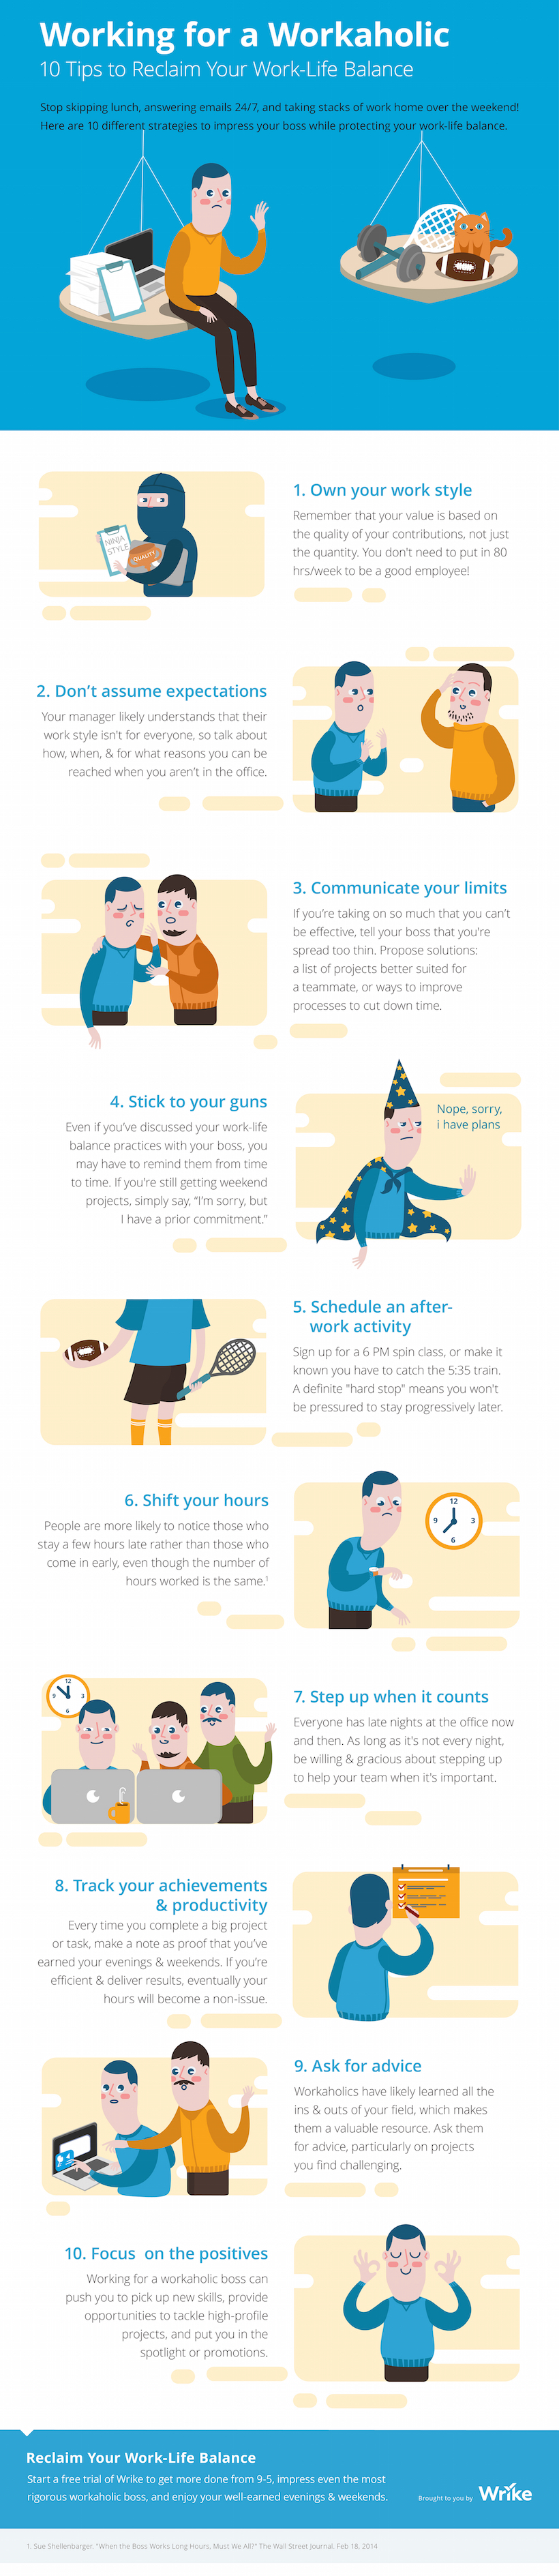 Working for a Workaholic: 10 Tips to Reclaim Your Work-Life Balance (Infographic)